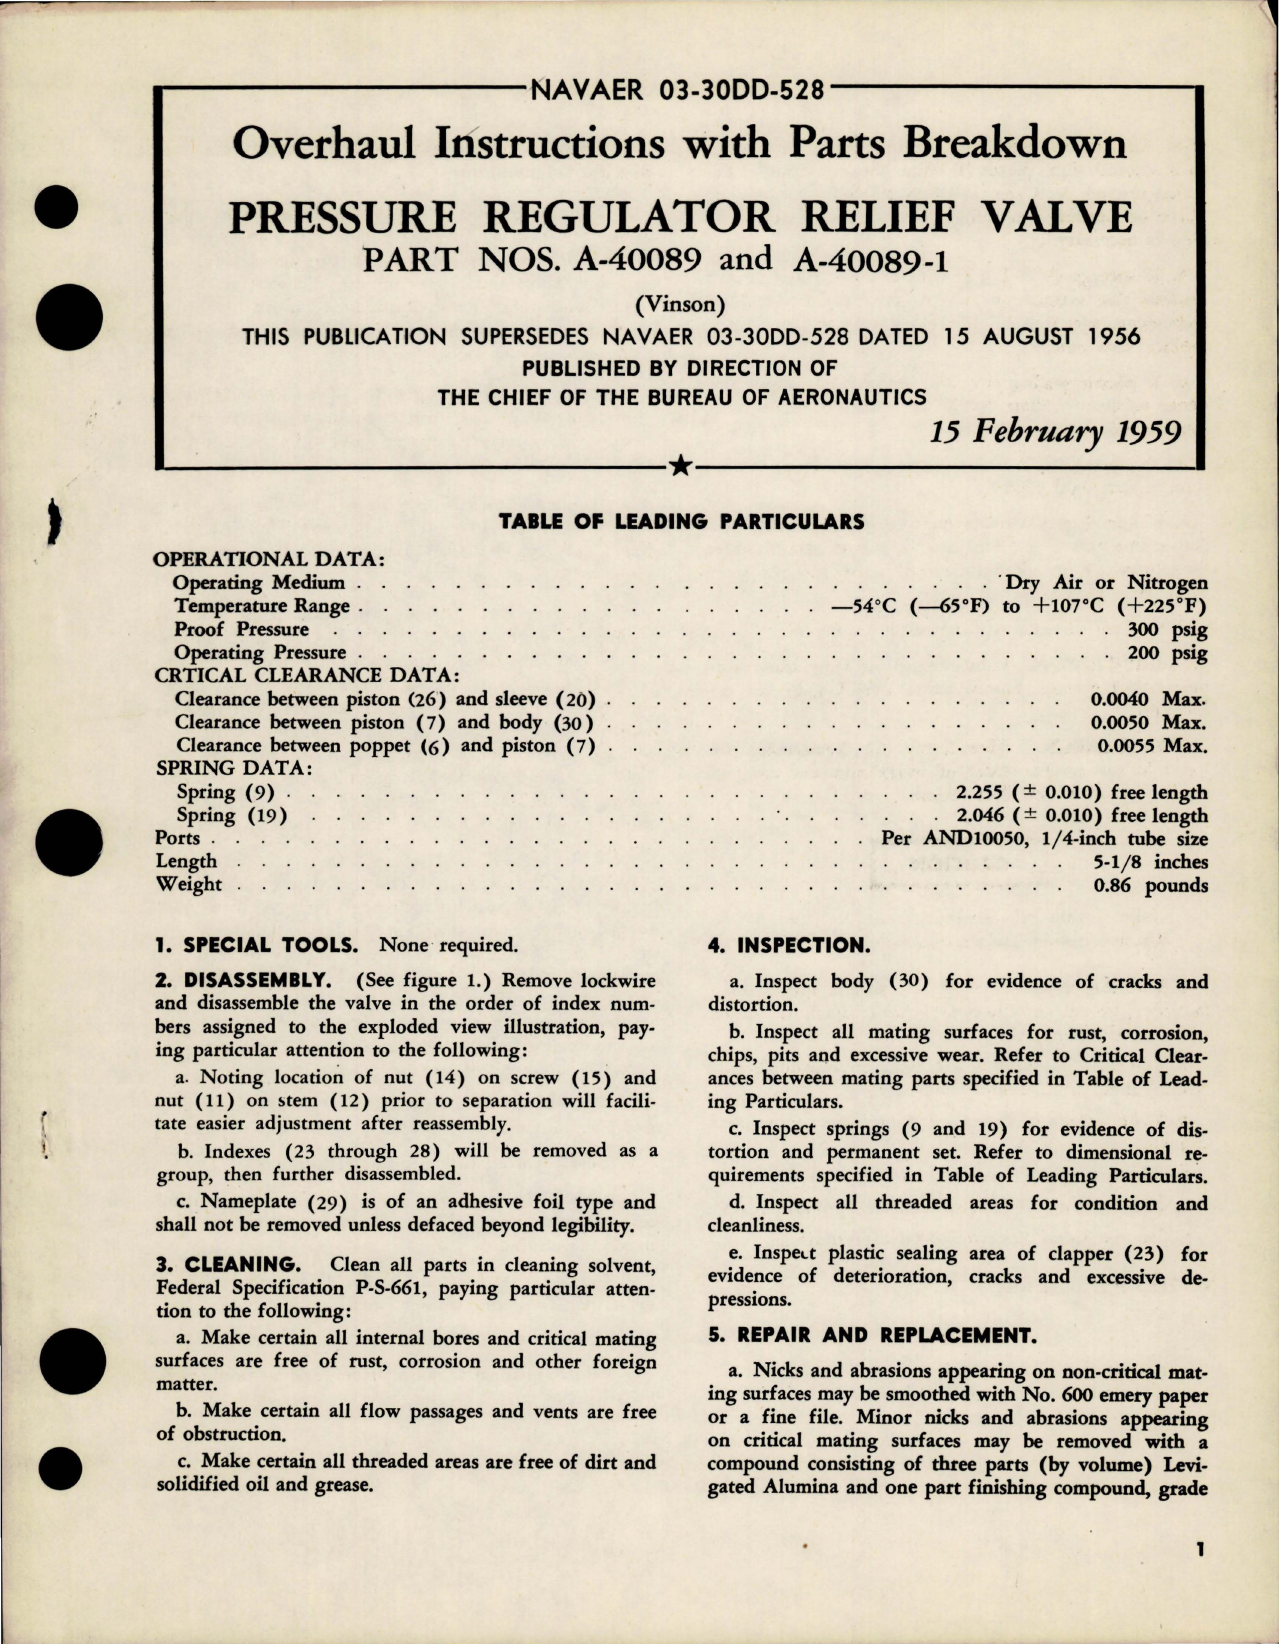 Sample page 1 from AirCorps Library document: Overhaul Instructions with Parts Breakdown for Pressure Regulator Relief Valve - Part A-40089 and A-40089-1